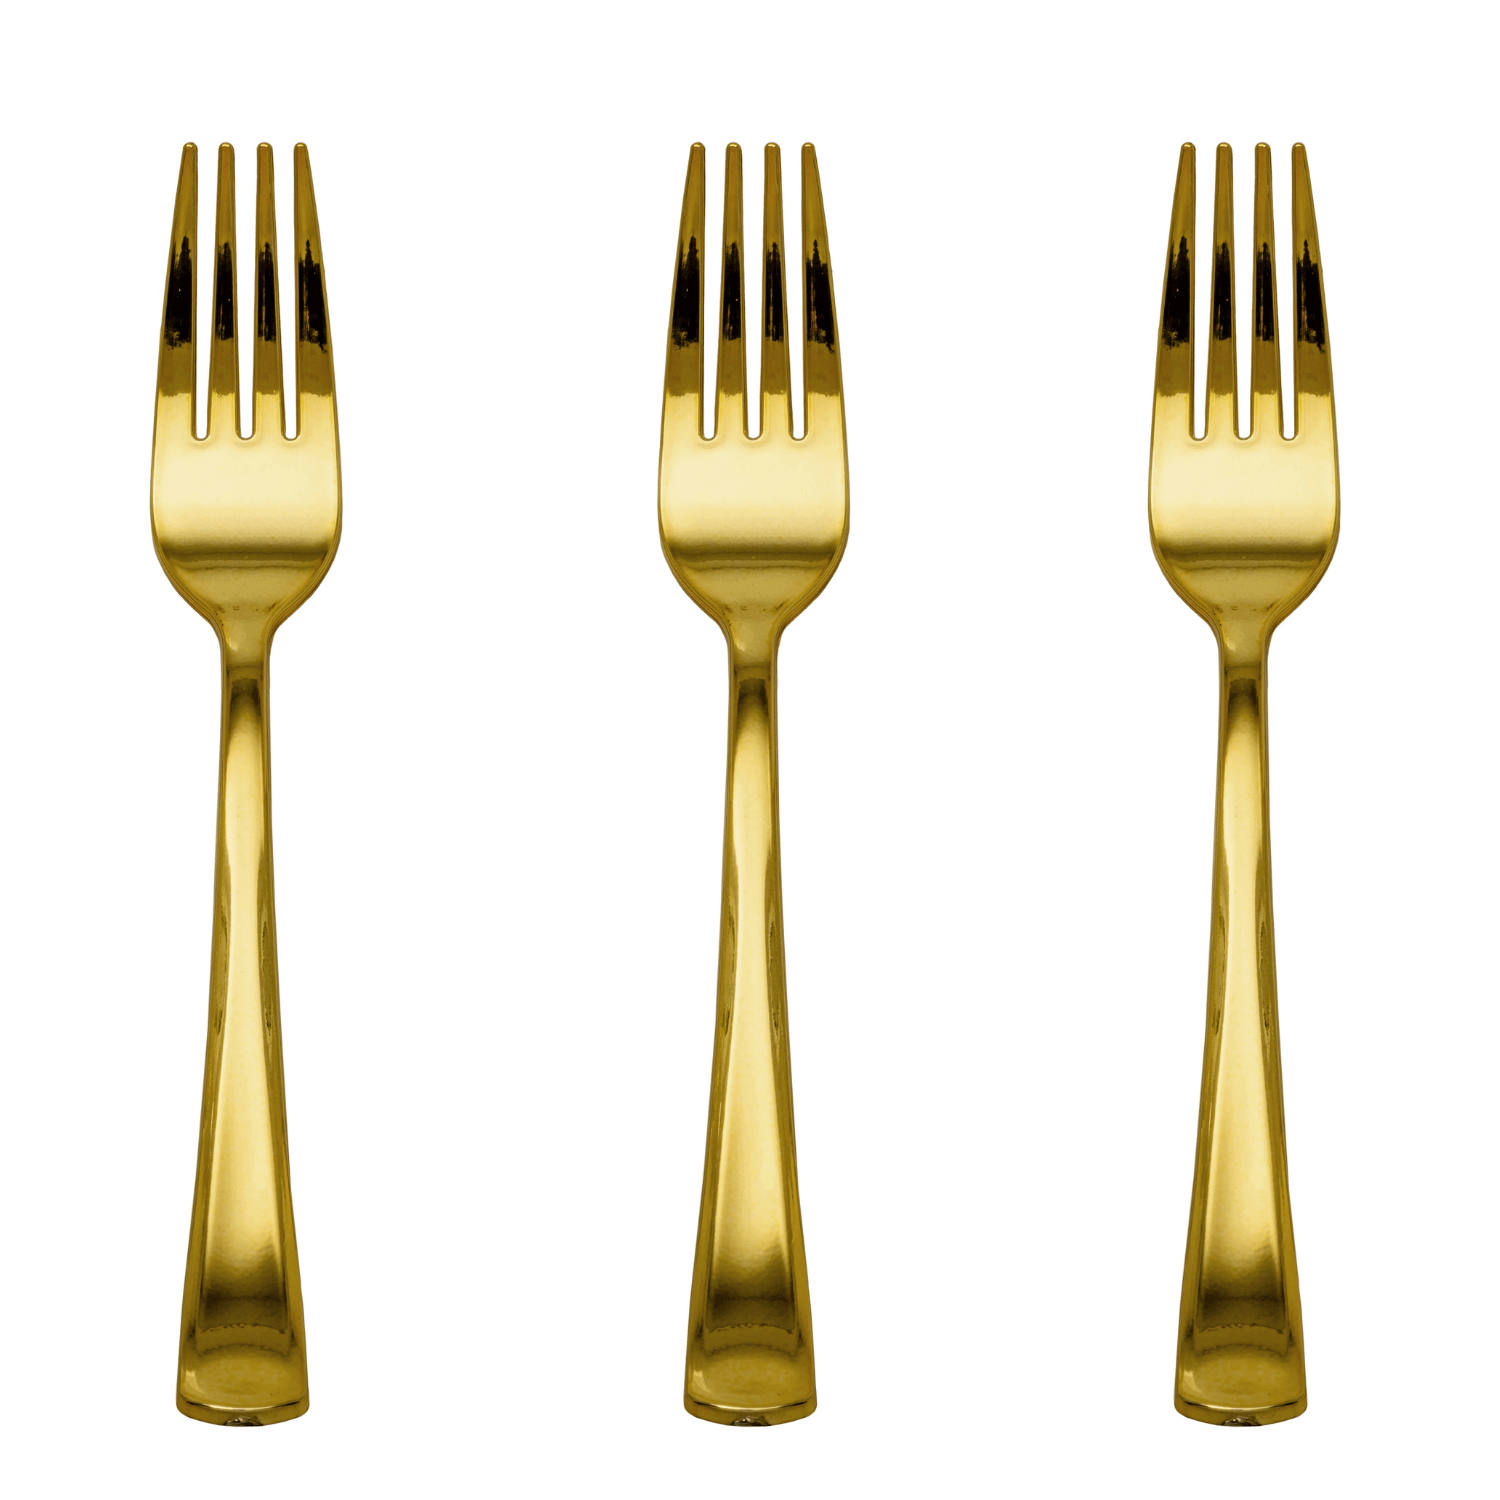 Exquisite Gold Plastic Forks | 480 Count - Yom Tov Settings